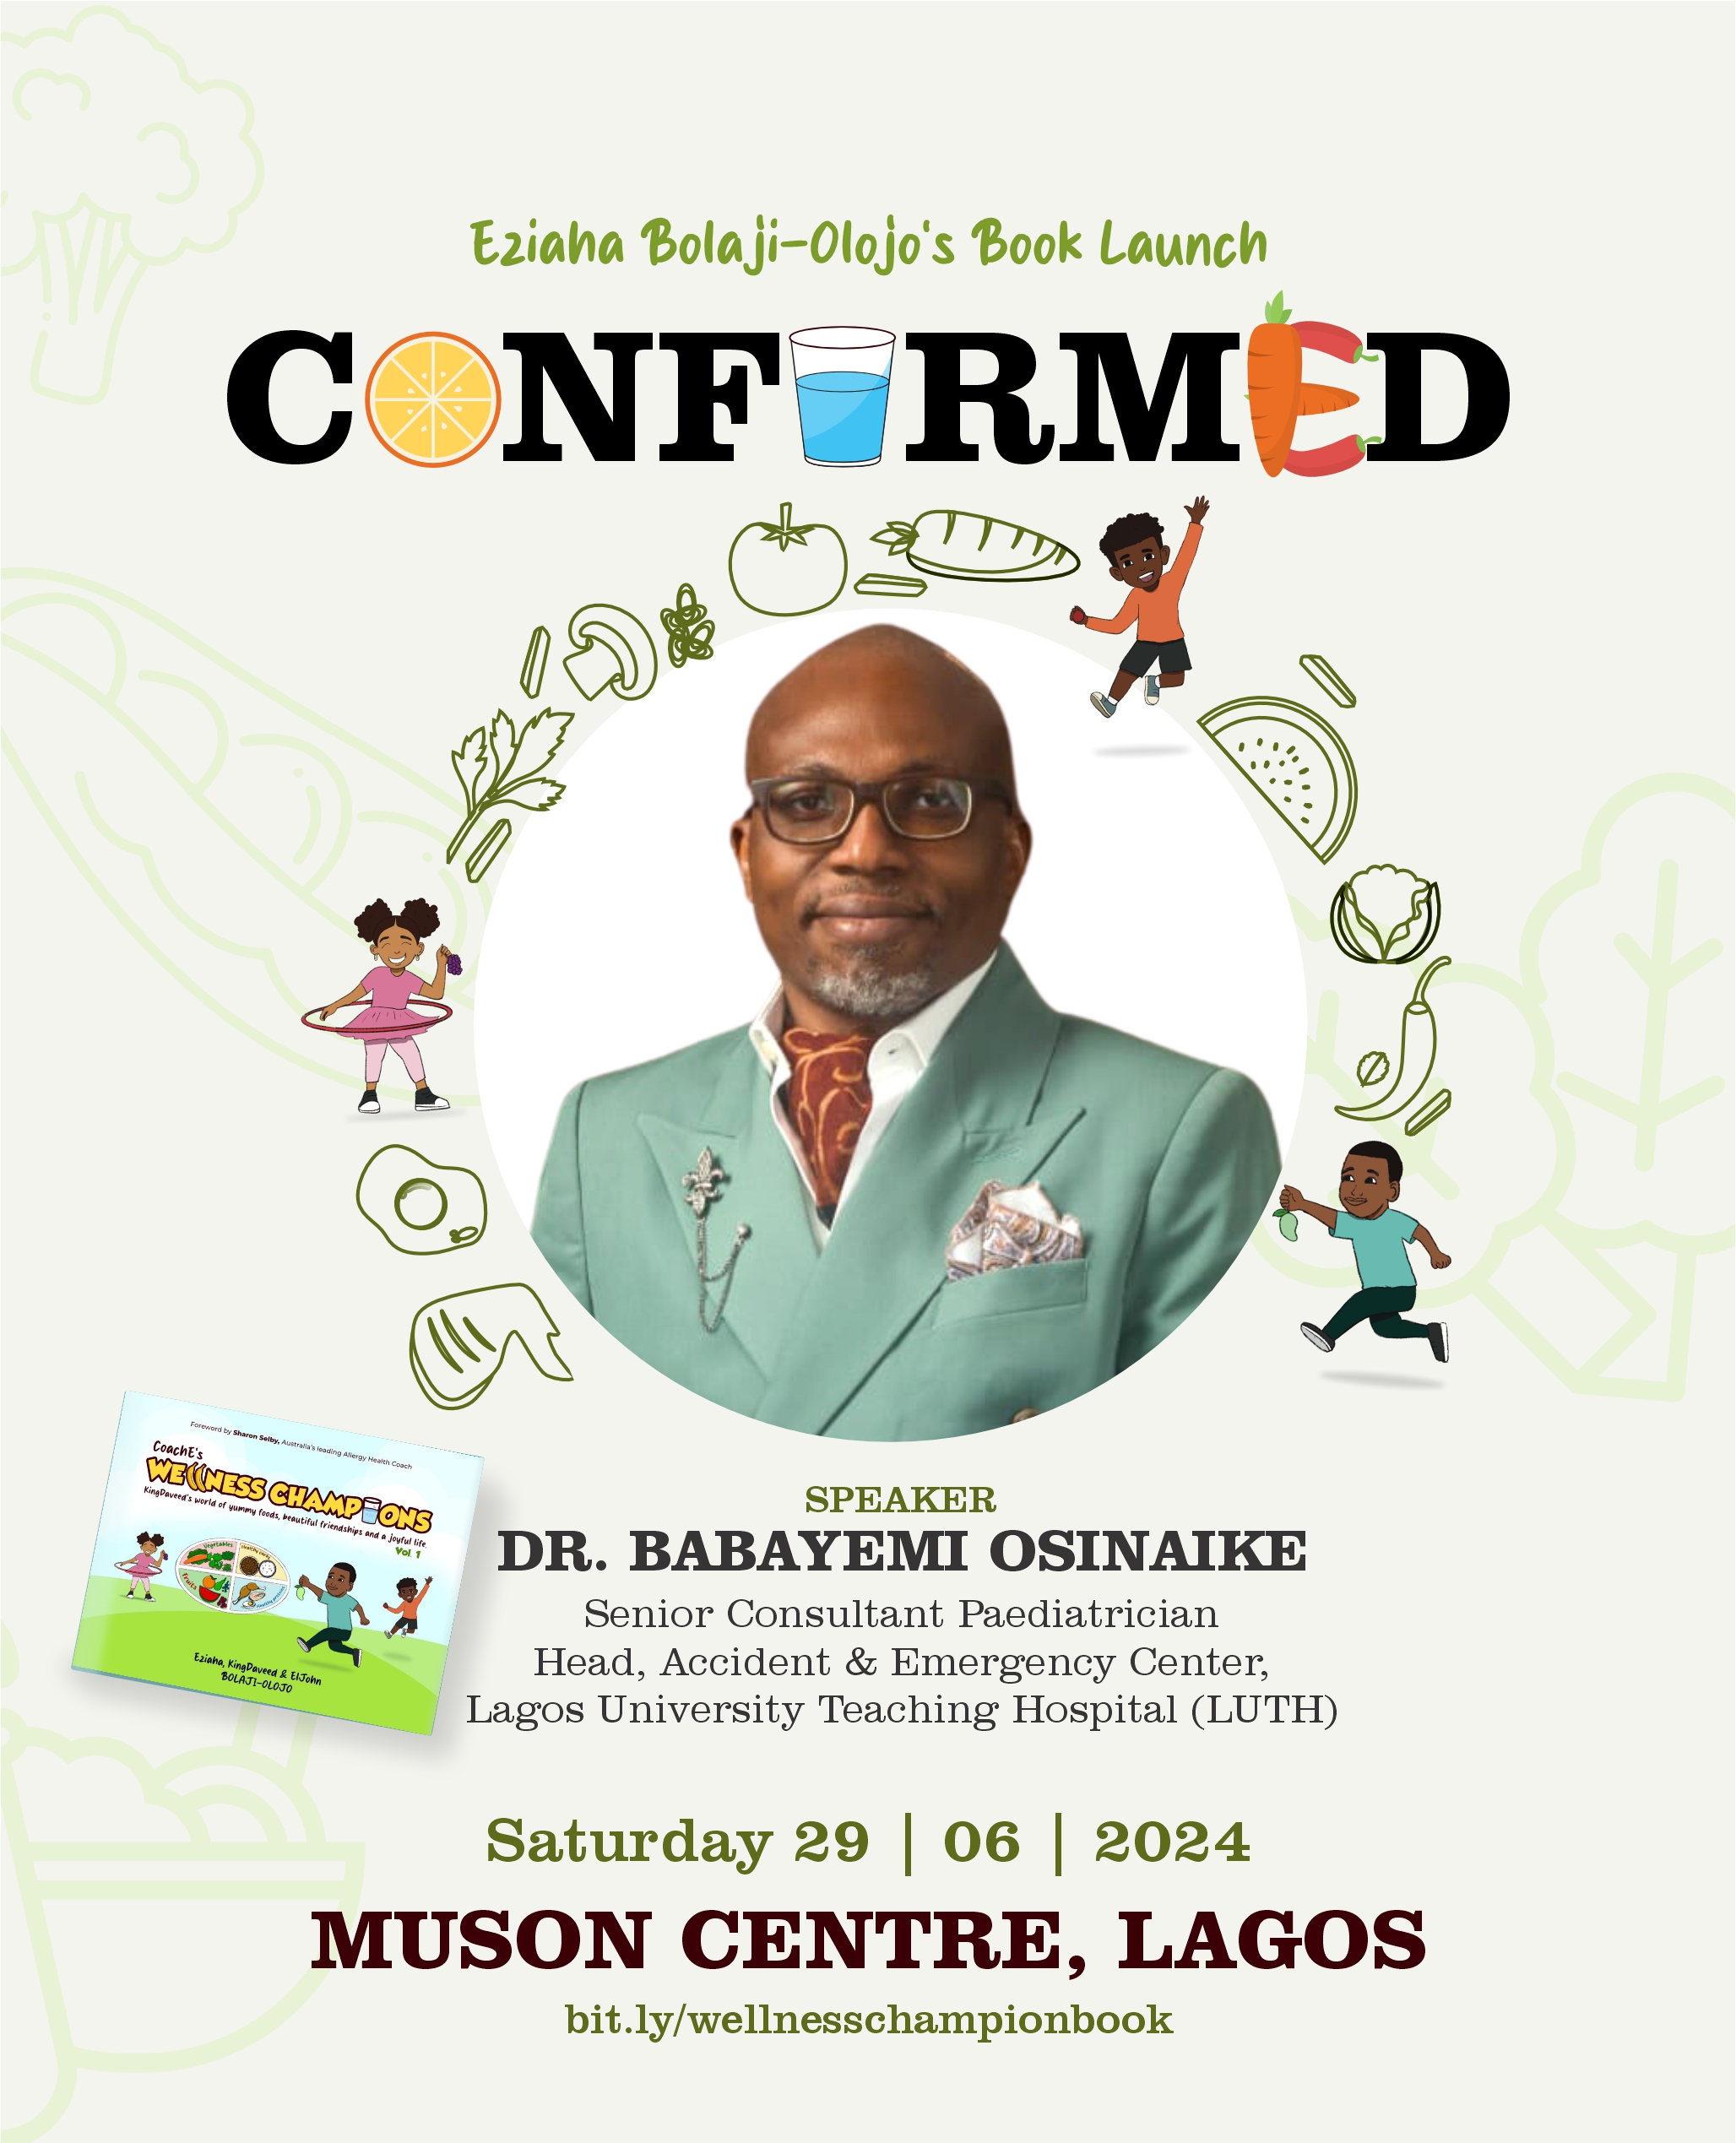 Confirmed - Dr Babayemi